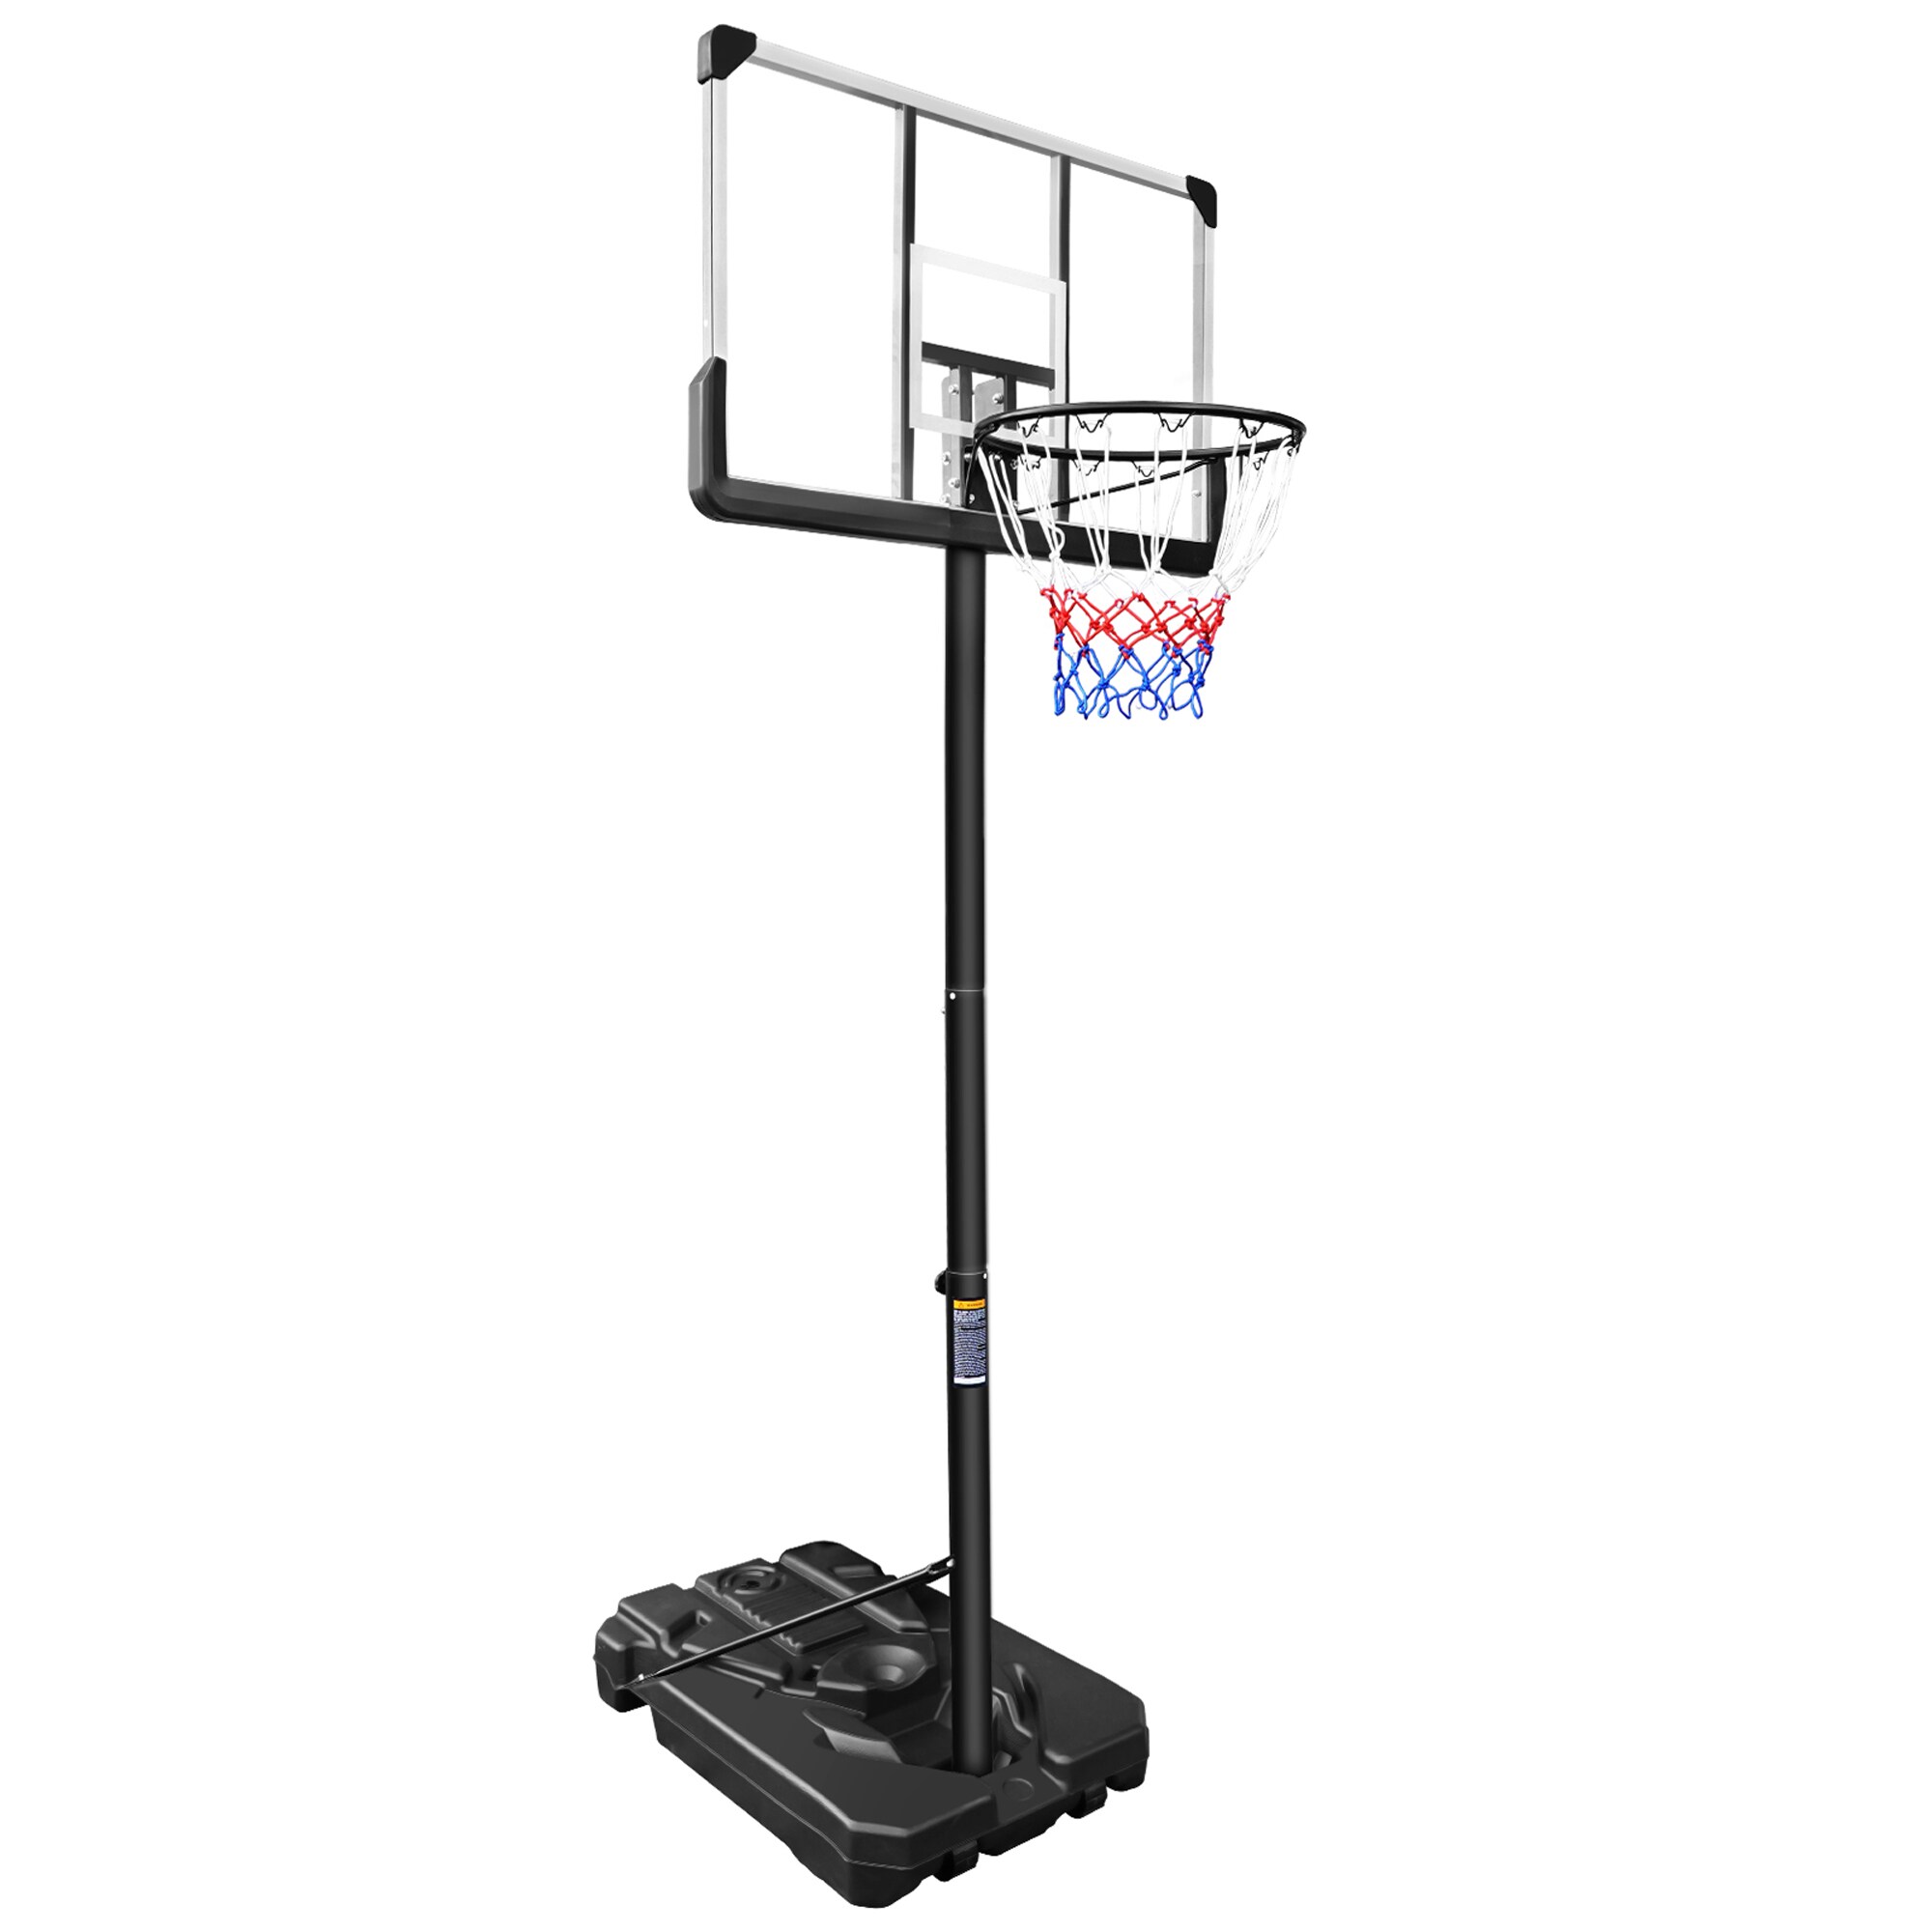 Basketball Systems at Lowes.com